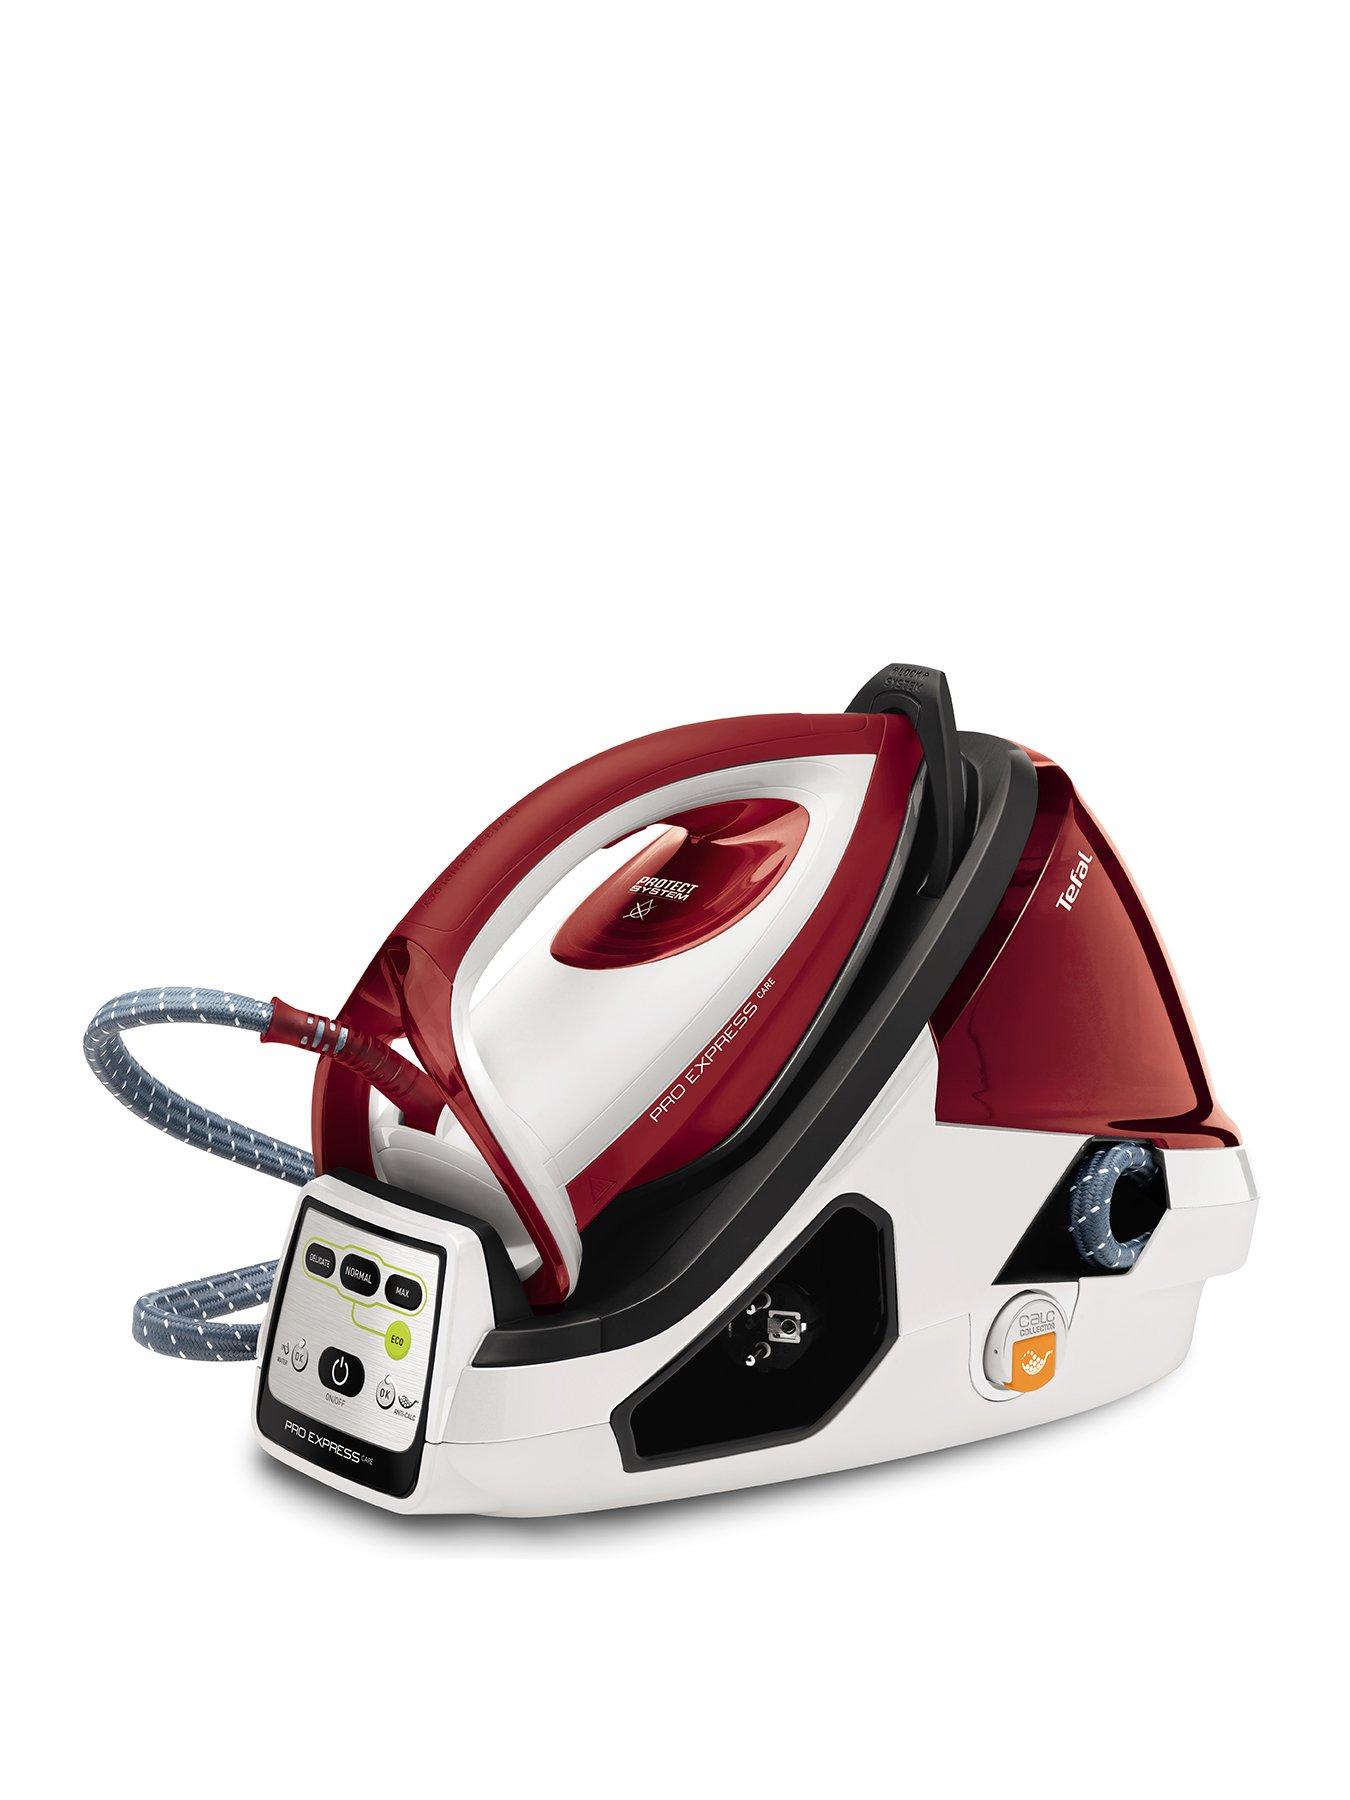 Details about   Tefal GV9071 Pro Express Care Steam Generator 